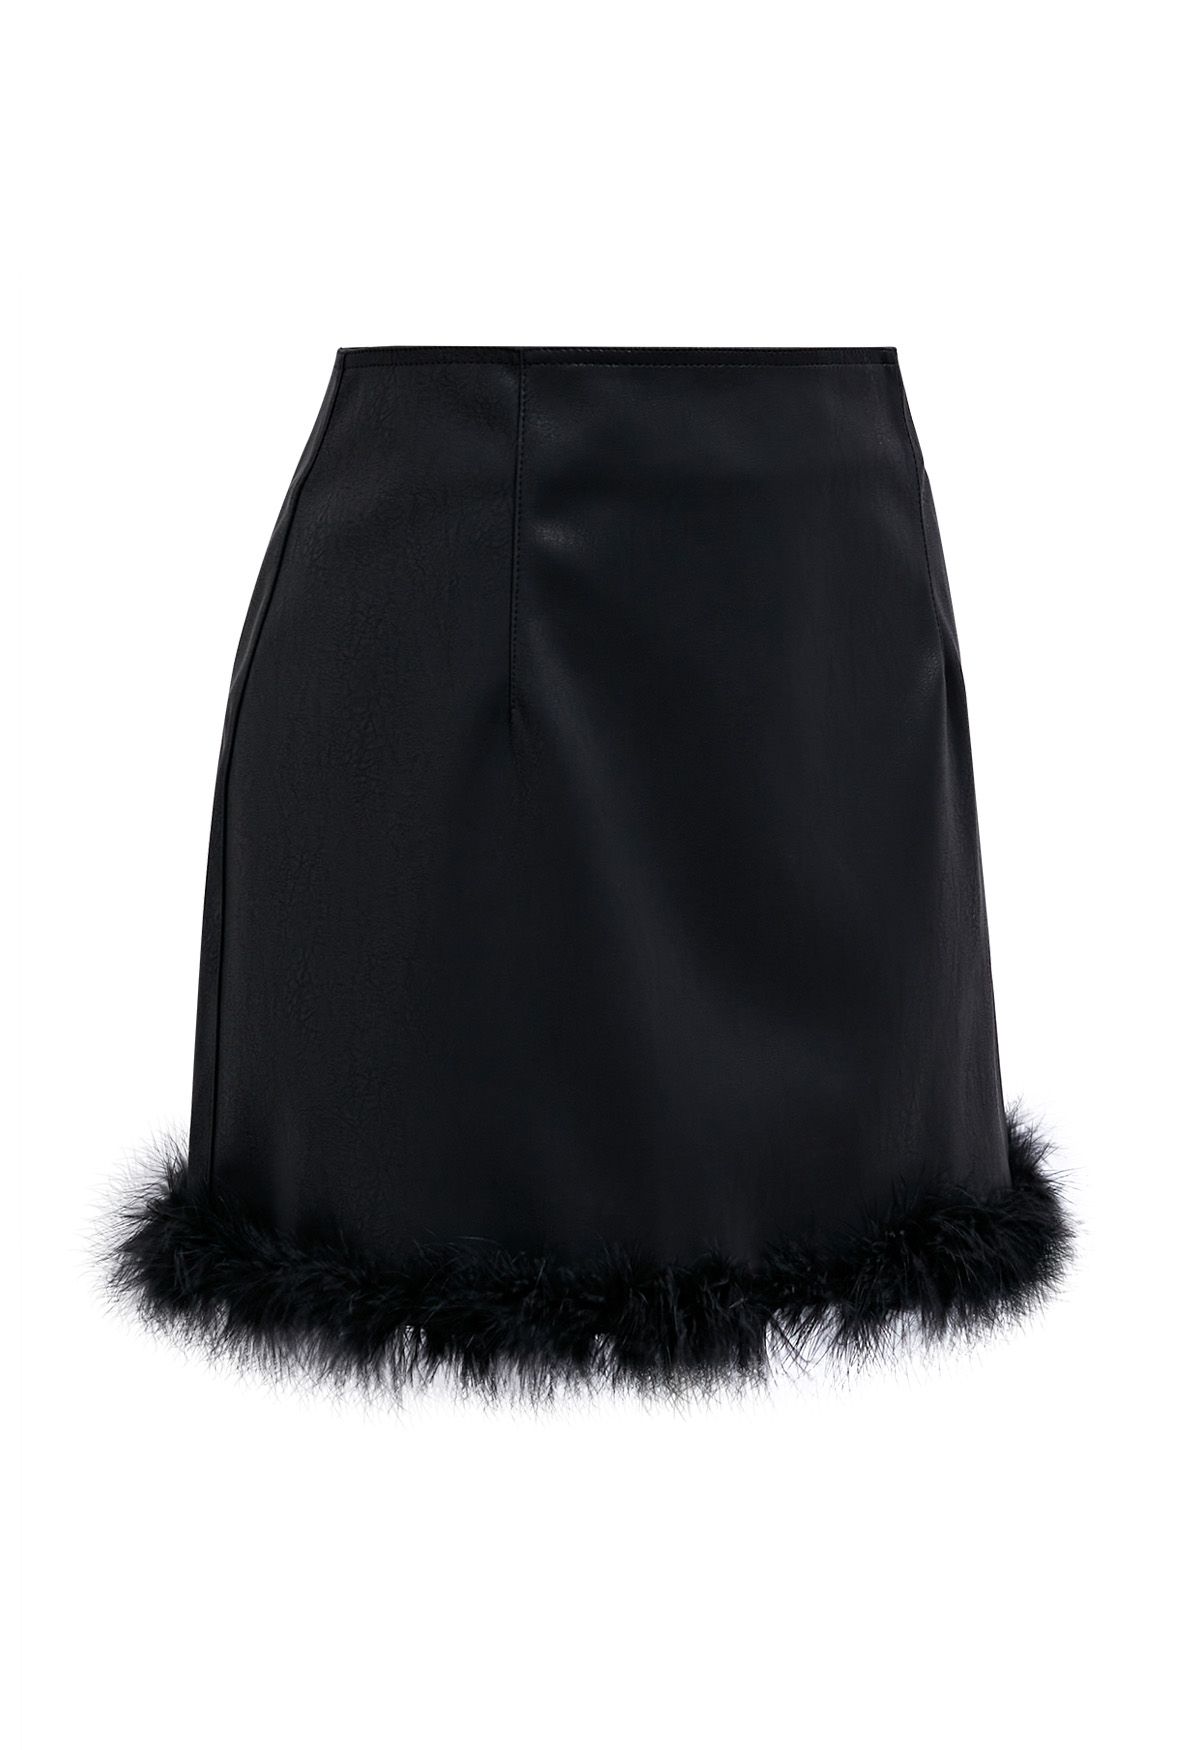 Feather Hem Faux Leather Mini Skirt in Black - Retro, Indie and Unique ...